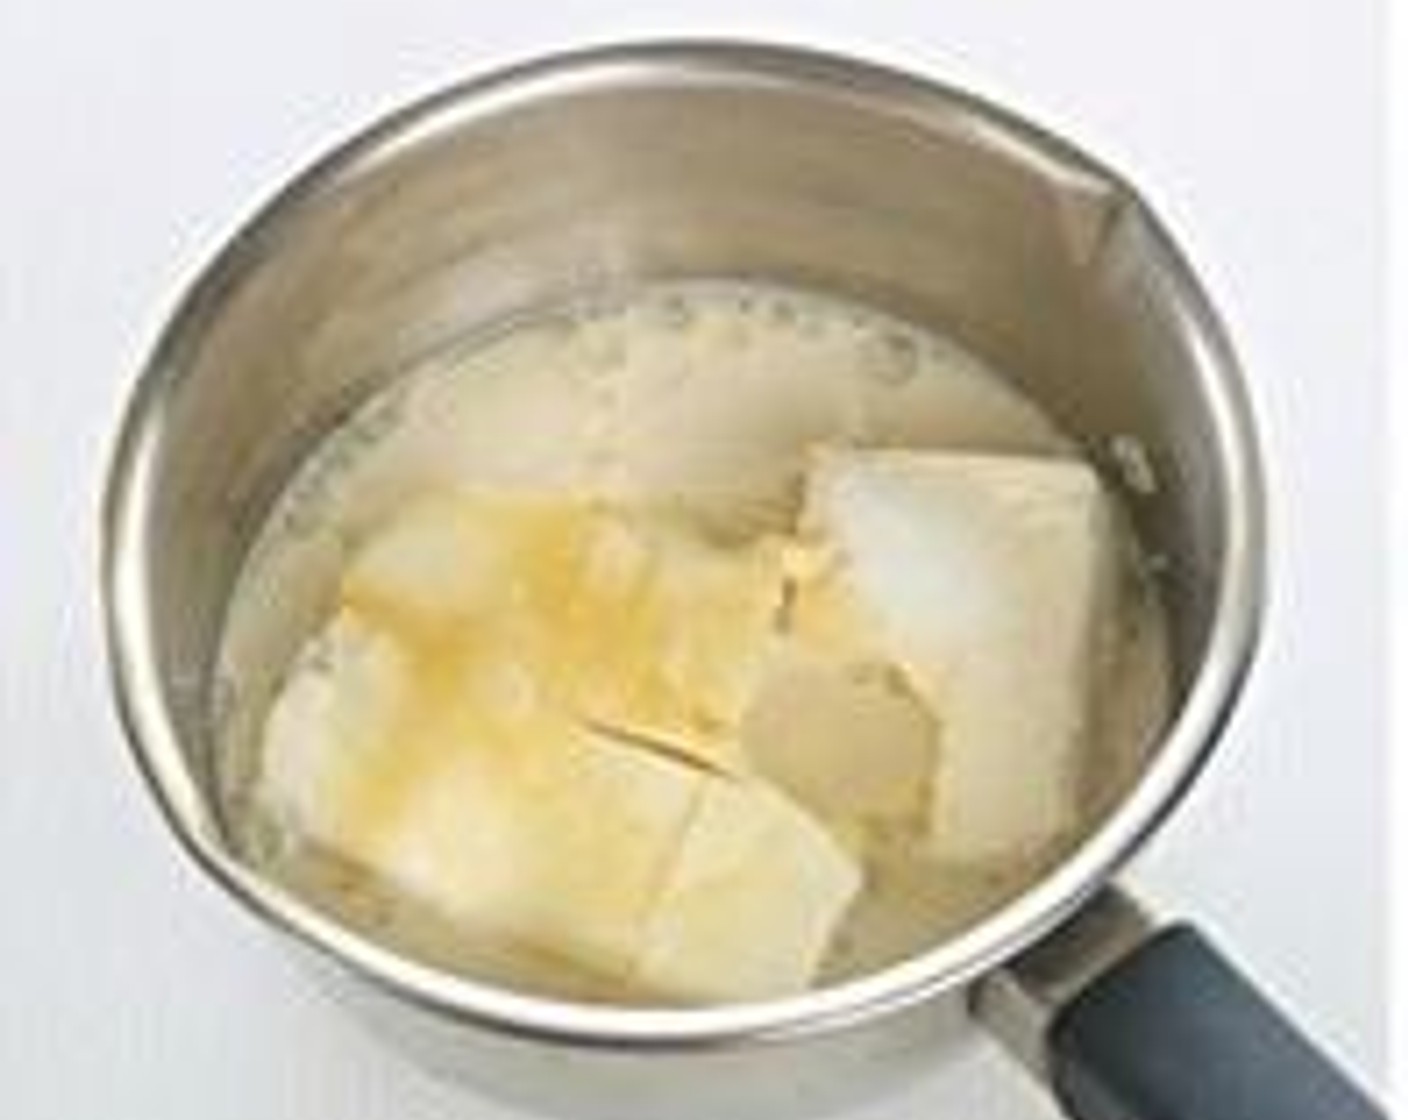 step 1 Place Cream Cheese (1 cup), Corn Oil (2 1/2 Tbsp), Caster Sugar (3 Tbsp), Honey (2 Tbsp) and Milk (1/3 cup) in a bowl under double boiler and stir mixture till melted. Then pass mixture through a sieve into a large bowl.